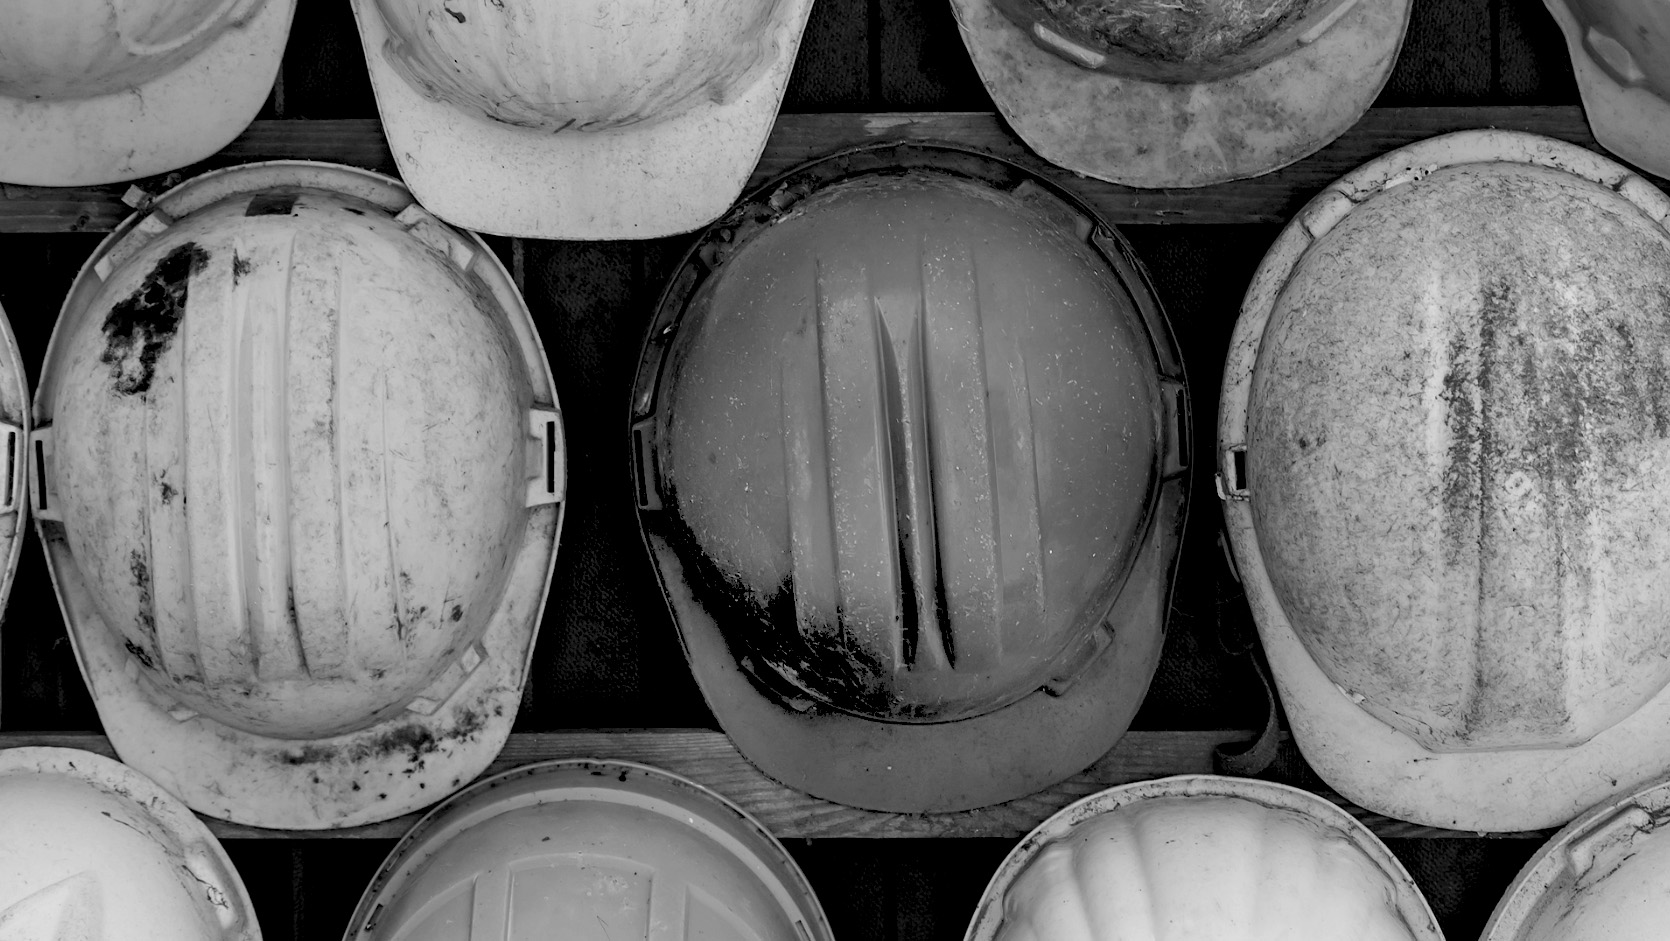 black and white topdown images of hard hats used for construction jobsites